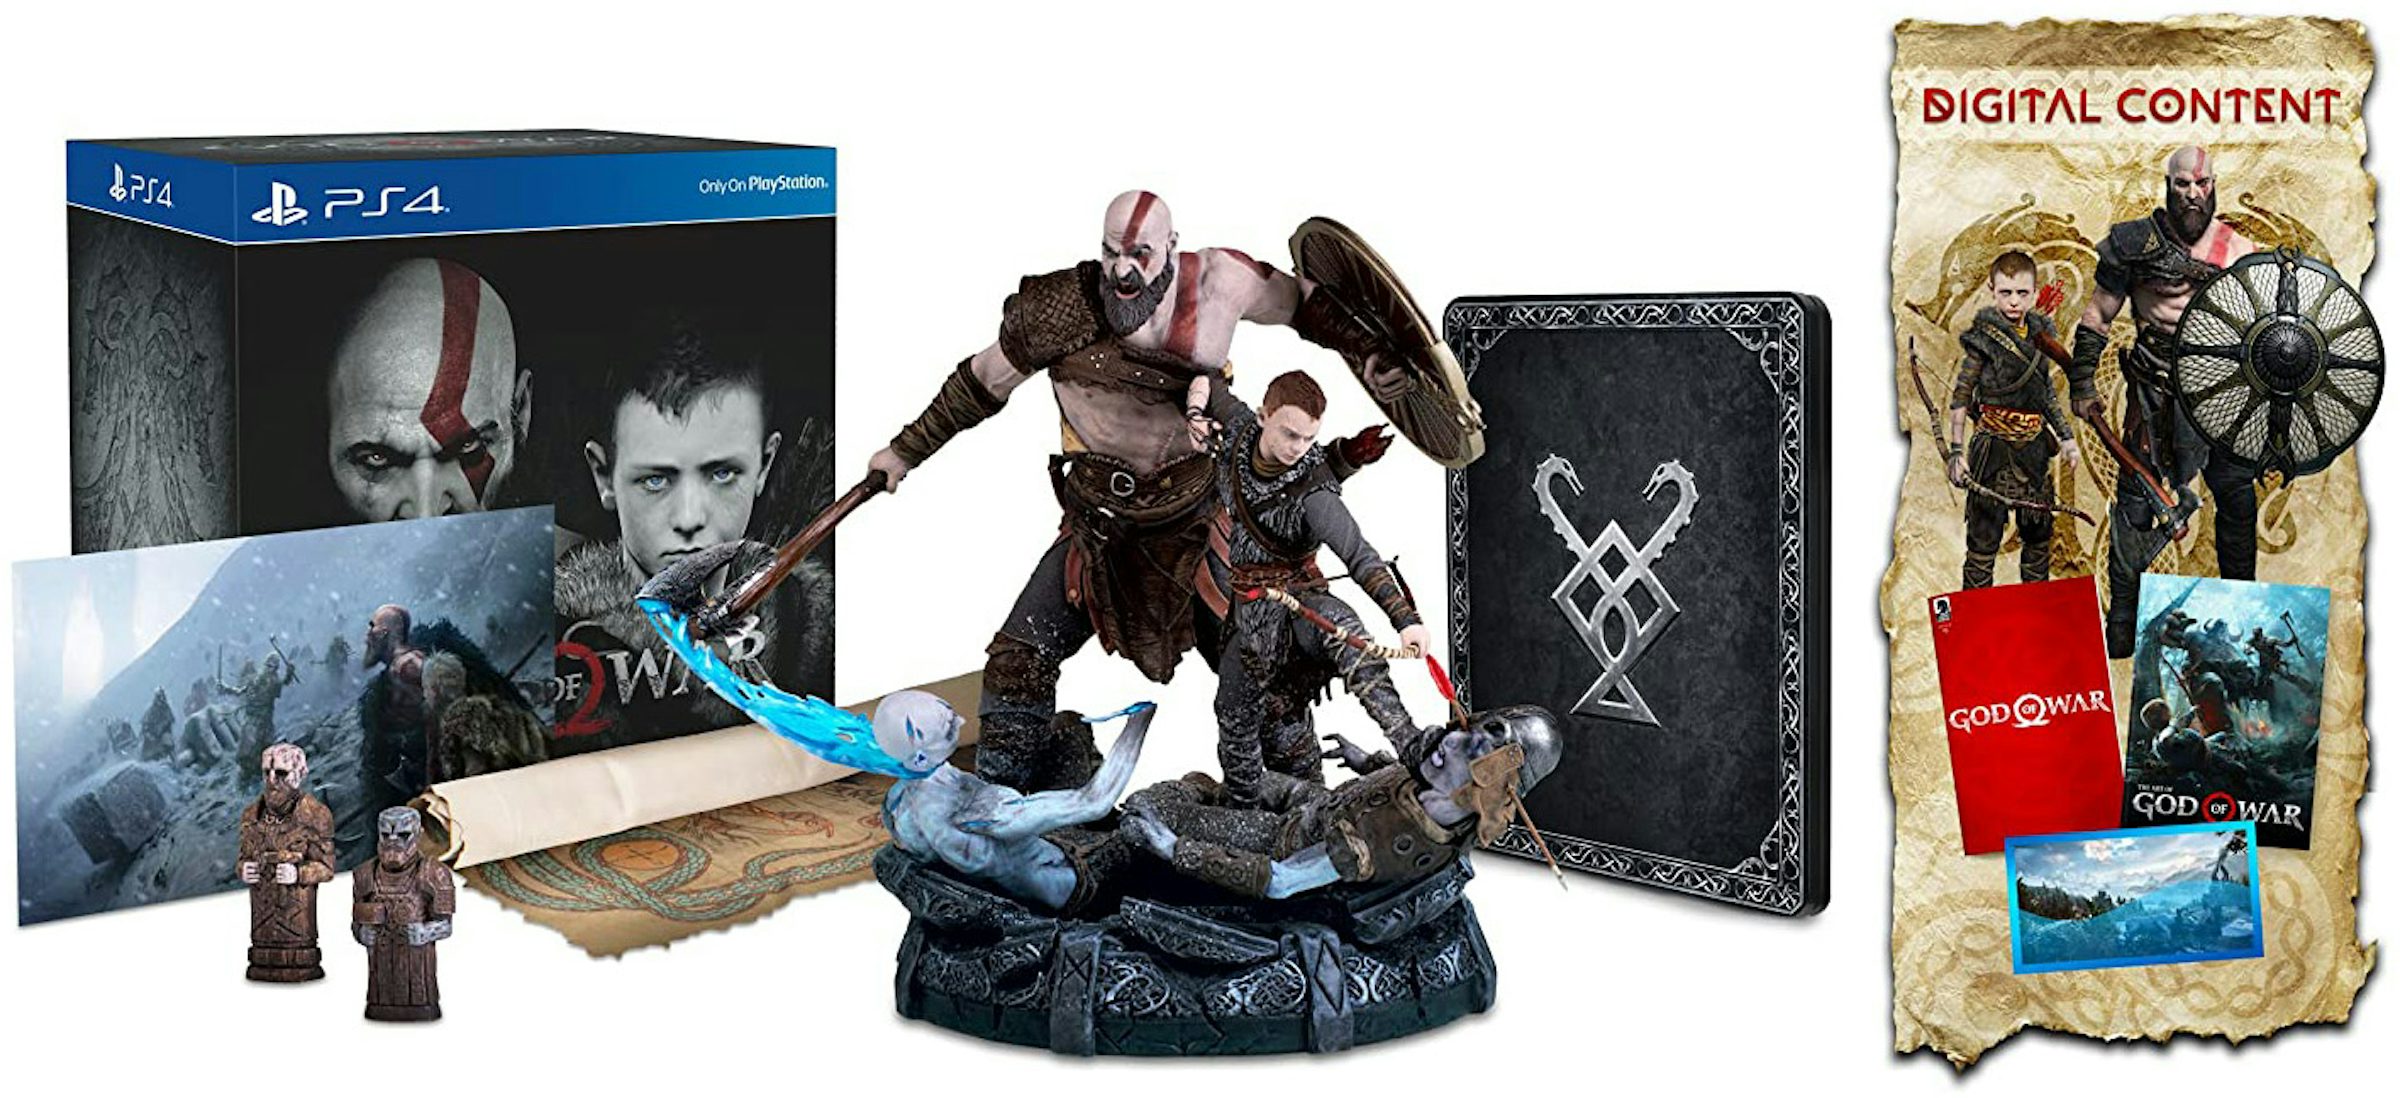 God of War Ragnarök Collector's Edition - PS4 and PS5 Entitlements